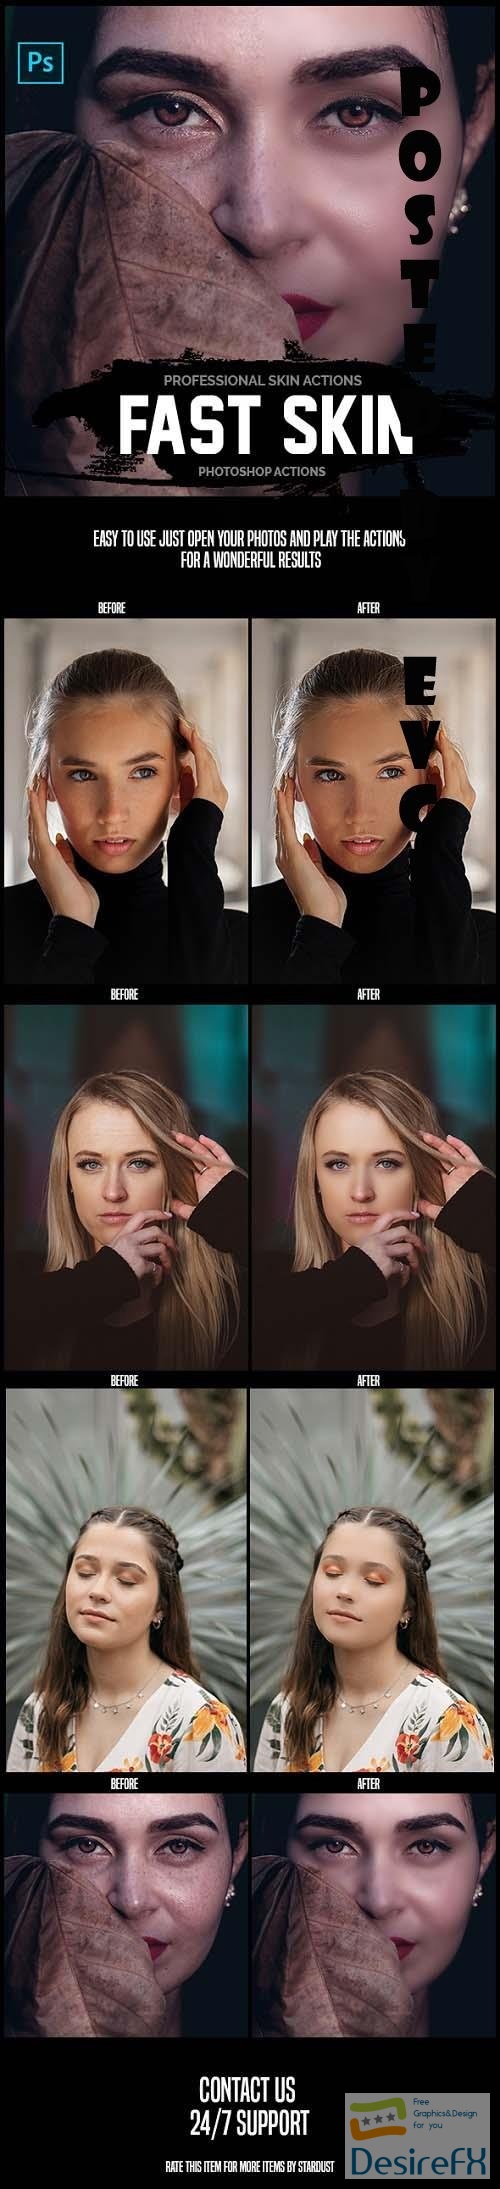 Fast Skin - Professional Photoshop Actions | Actions - 26154963